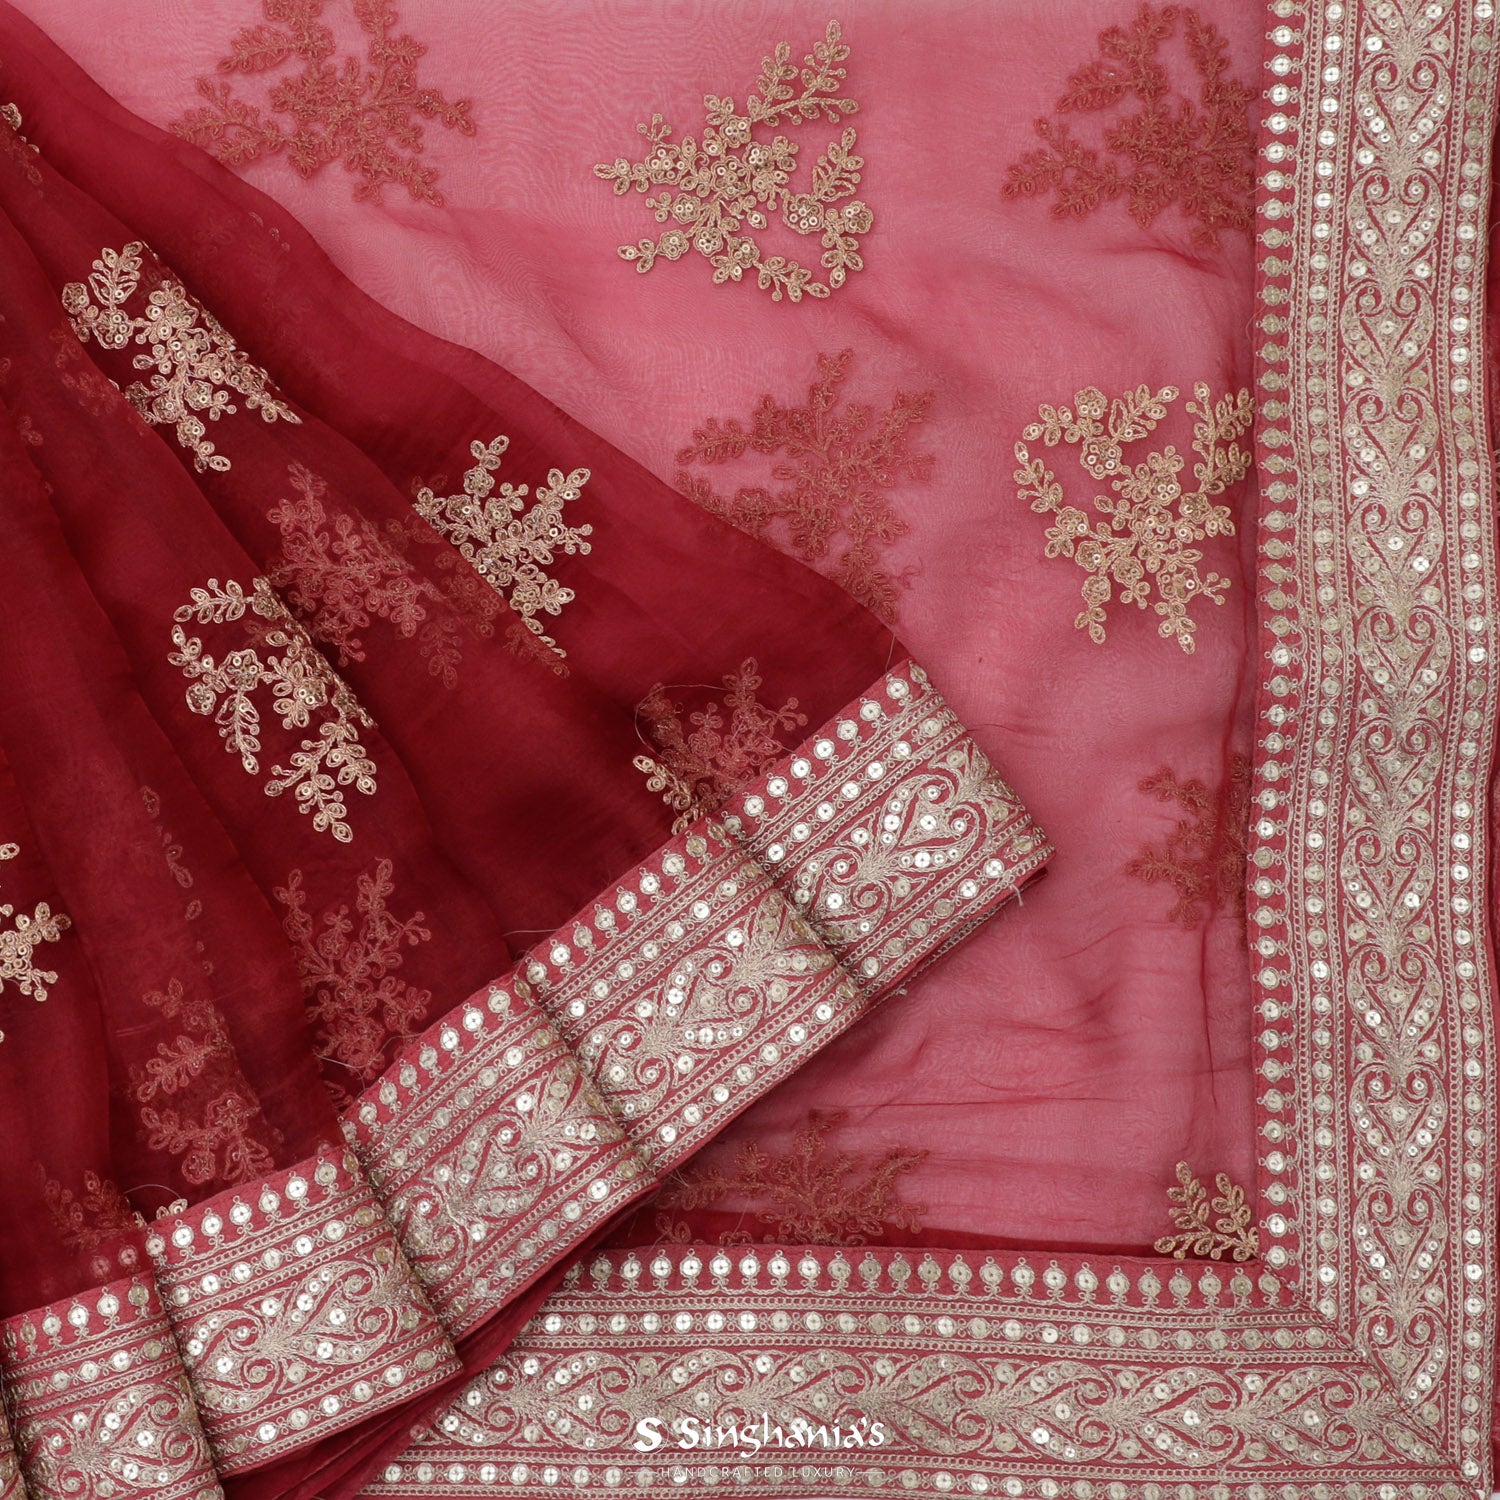 Penn Red Organza Saree With Floral Butti Pattern